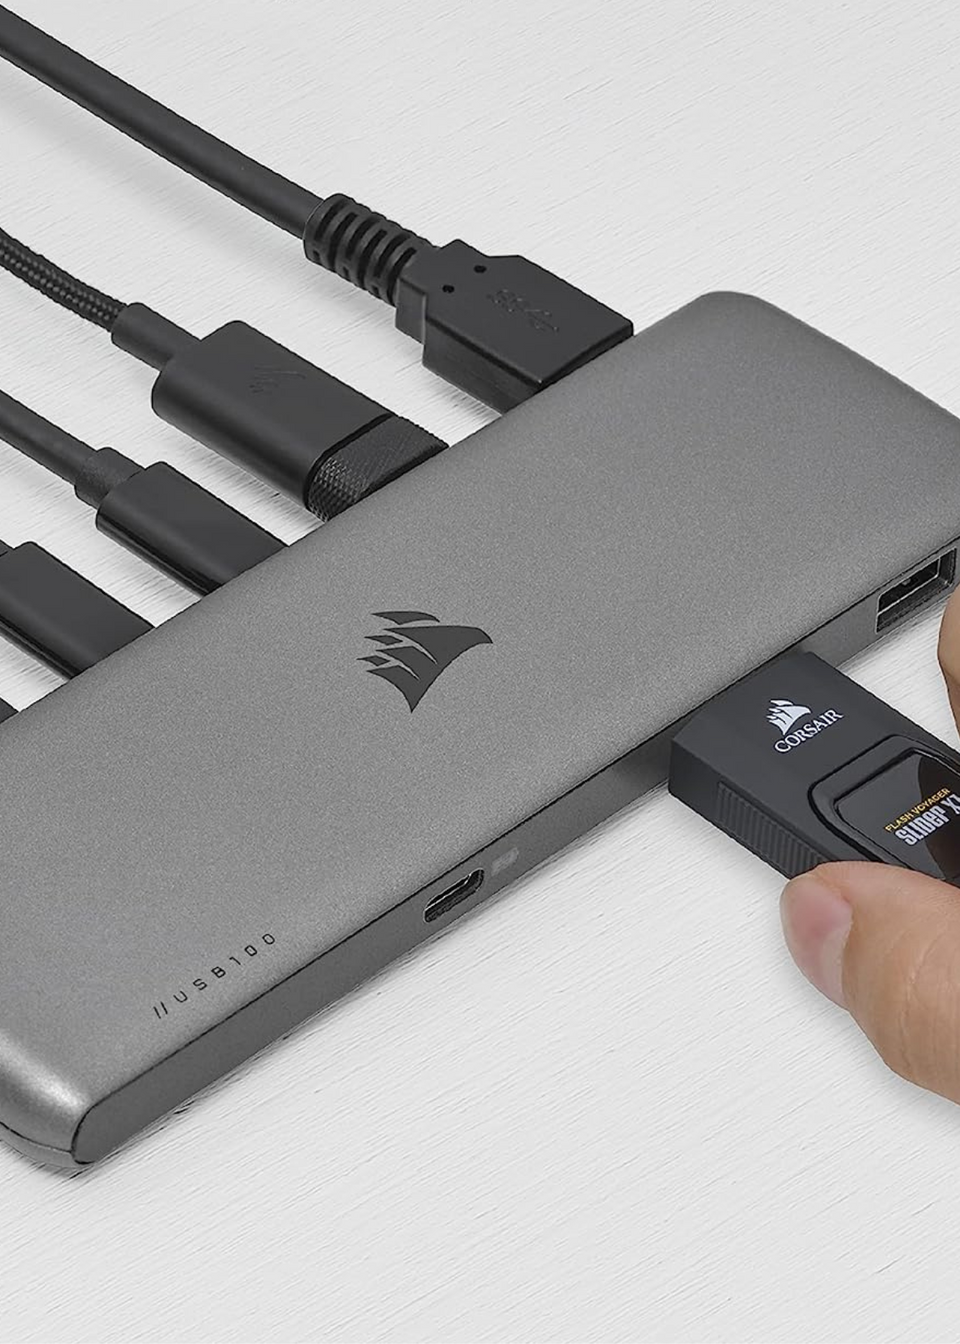 What Is a USB Hub & Why You Need One?